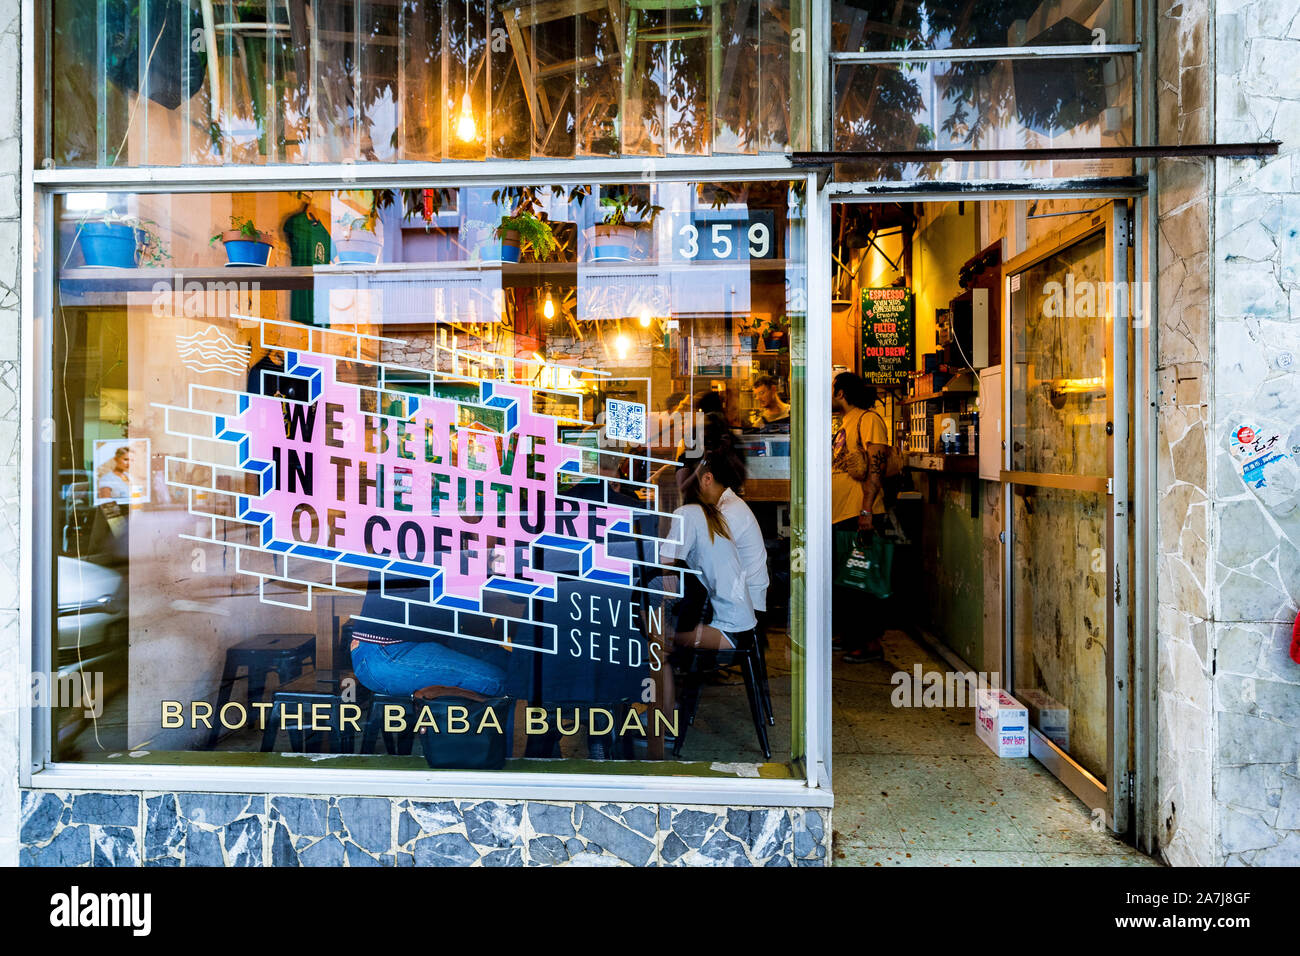 Brother Baba Budan Seven Seeds Coffee Shop in Melbourne, Australien Stockfoto